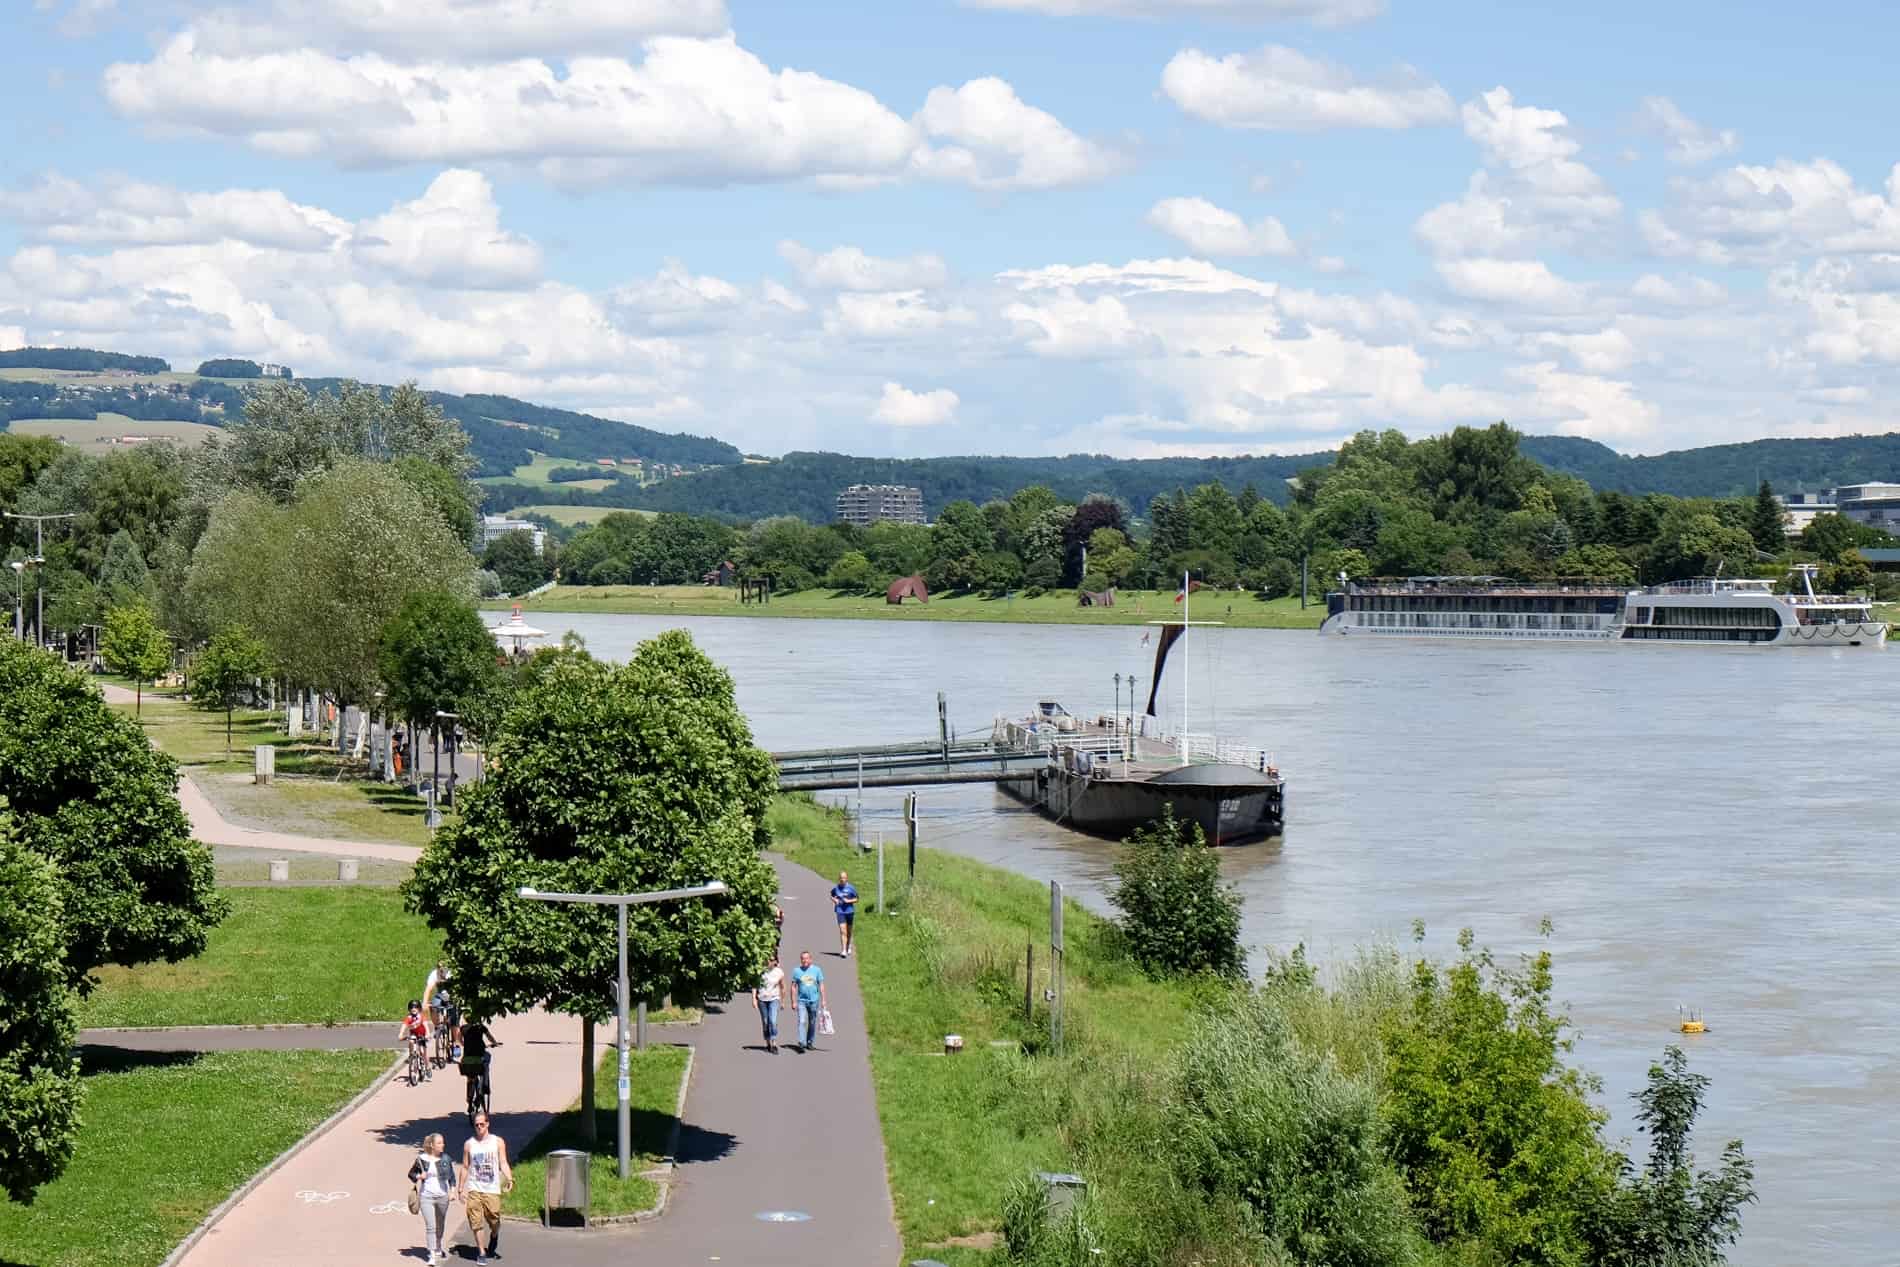 Green spaces, walking paths and docked boats on the Danube River in Linz, Austria. 